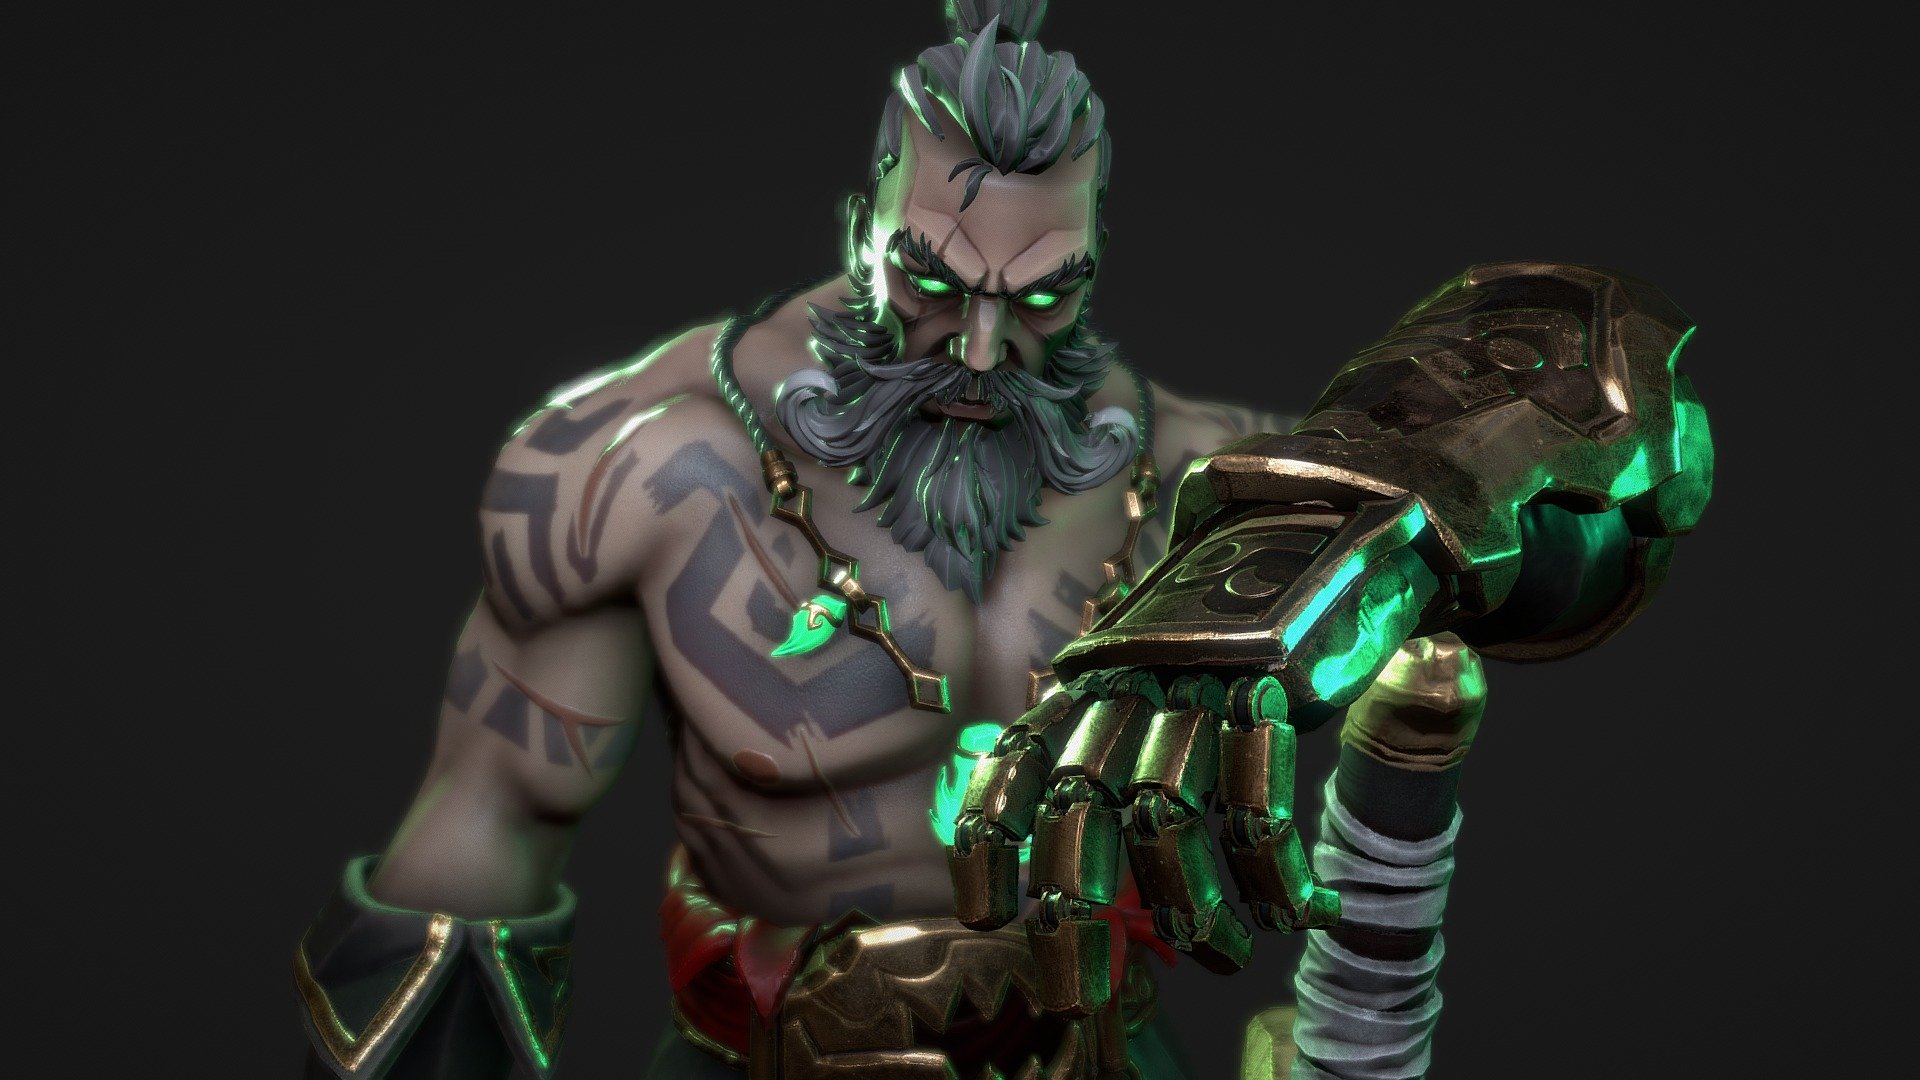 Personal piece for ruined king gangplank skin. Goal was 60k tris, and the character without weapon/plinth is 59k 3d model